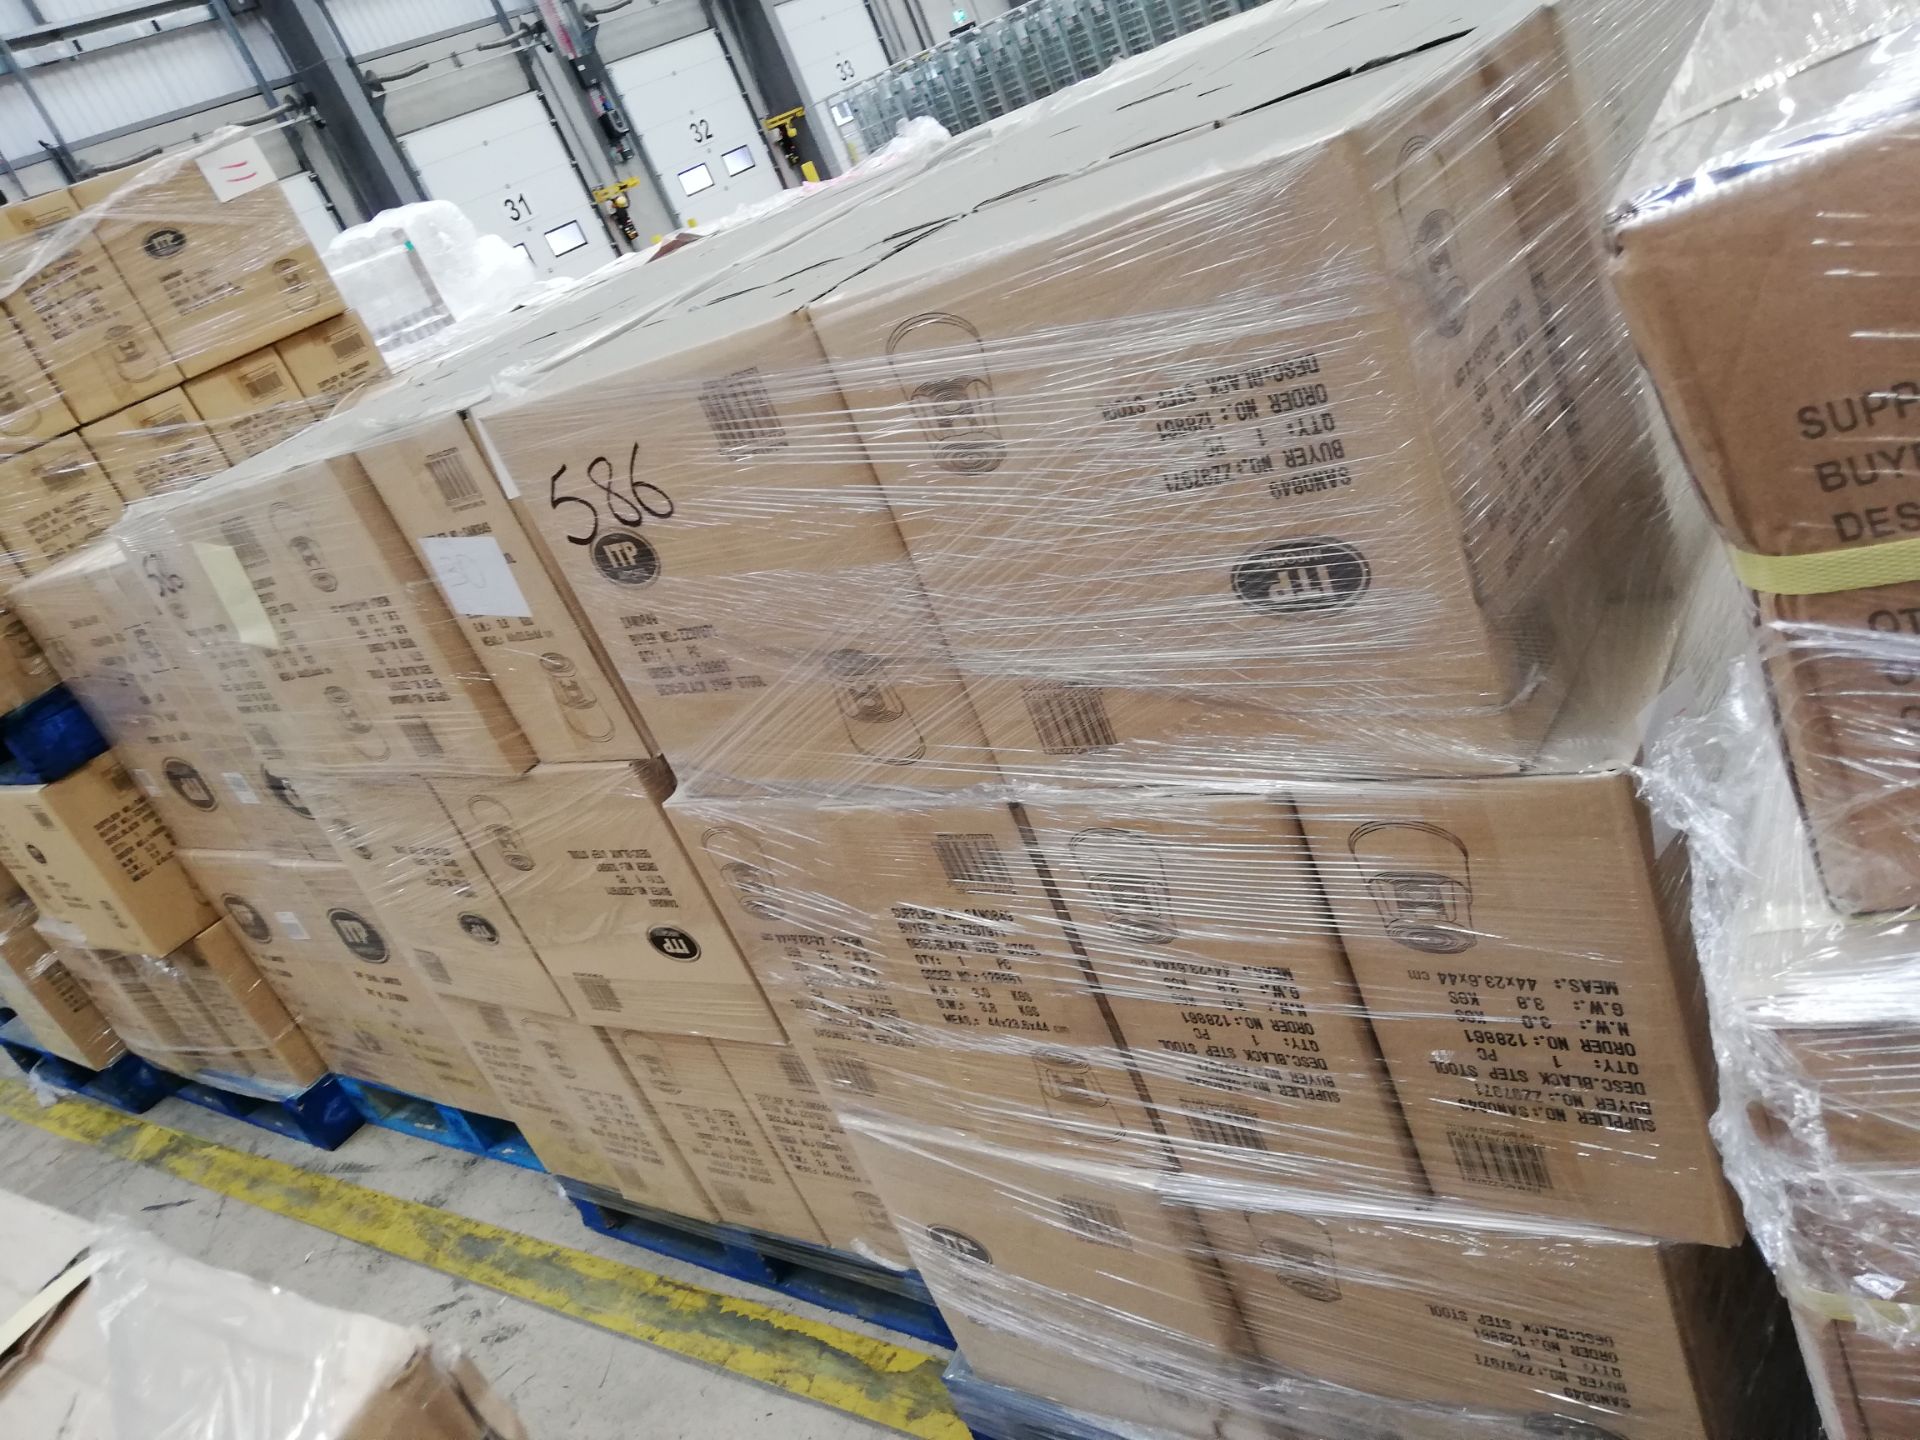 100 x ITP Black Step Stools (Boxed) on 3 pallets - Image 2 of 2